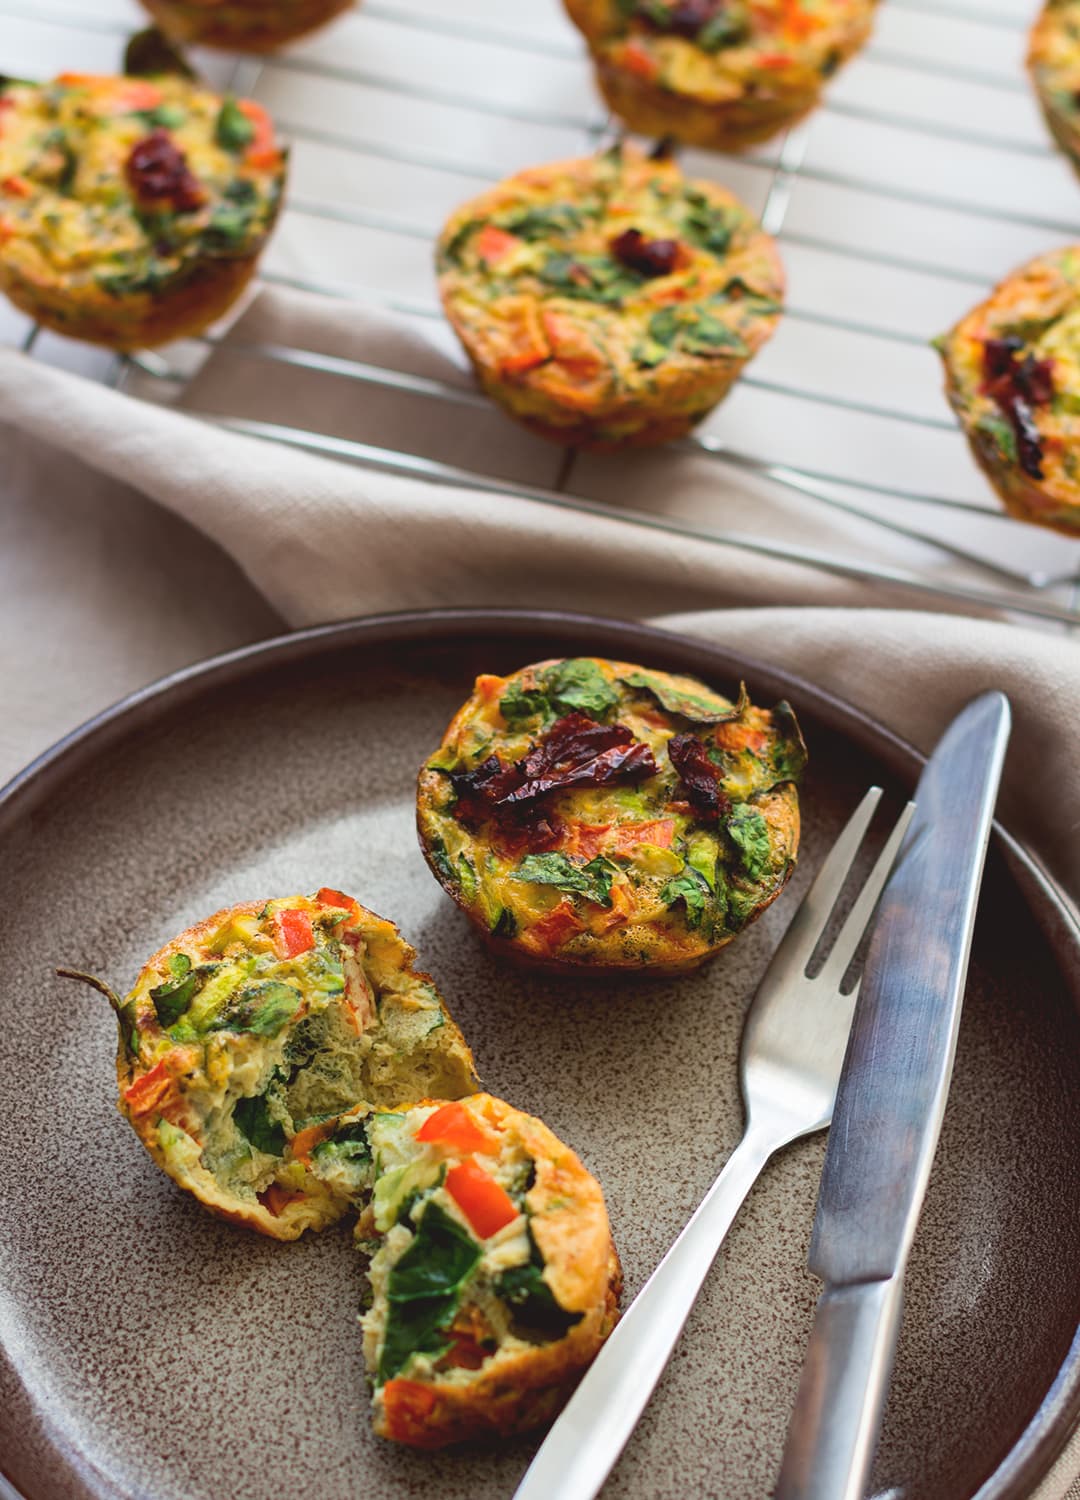 Healthy Breakfast Cheesy Egg Muffins - easy breakfast you can make ahead and eat on the go! Keep them in the fridge and add one or two to your salad for more protein! Delicious and cheesy muffins without the use of cheese - these are dairy free! | thehealthfulideas.com